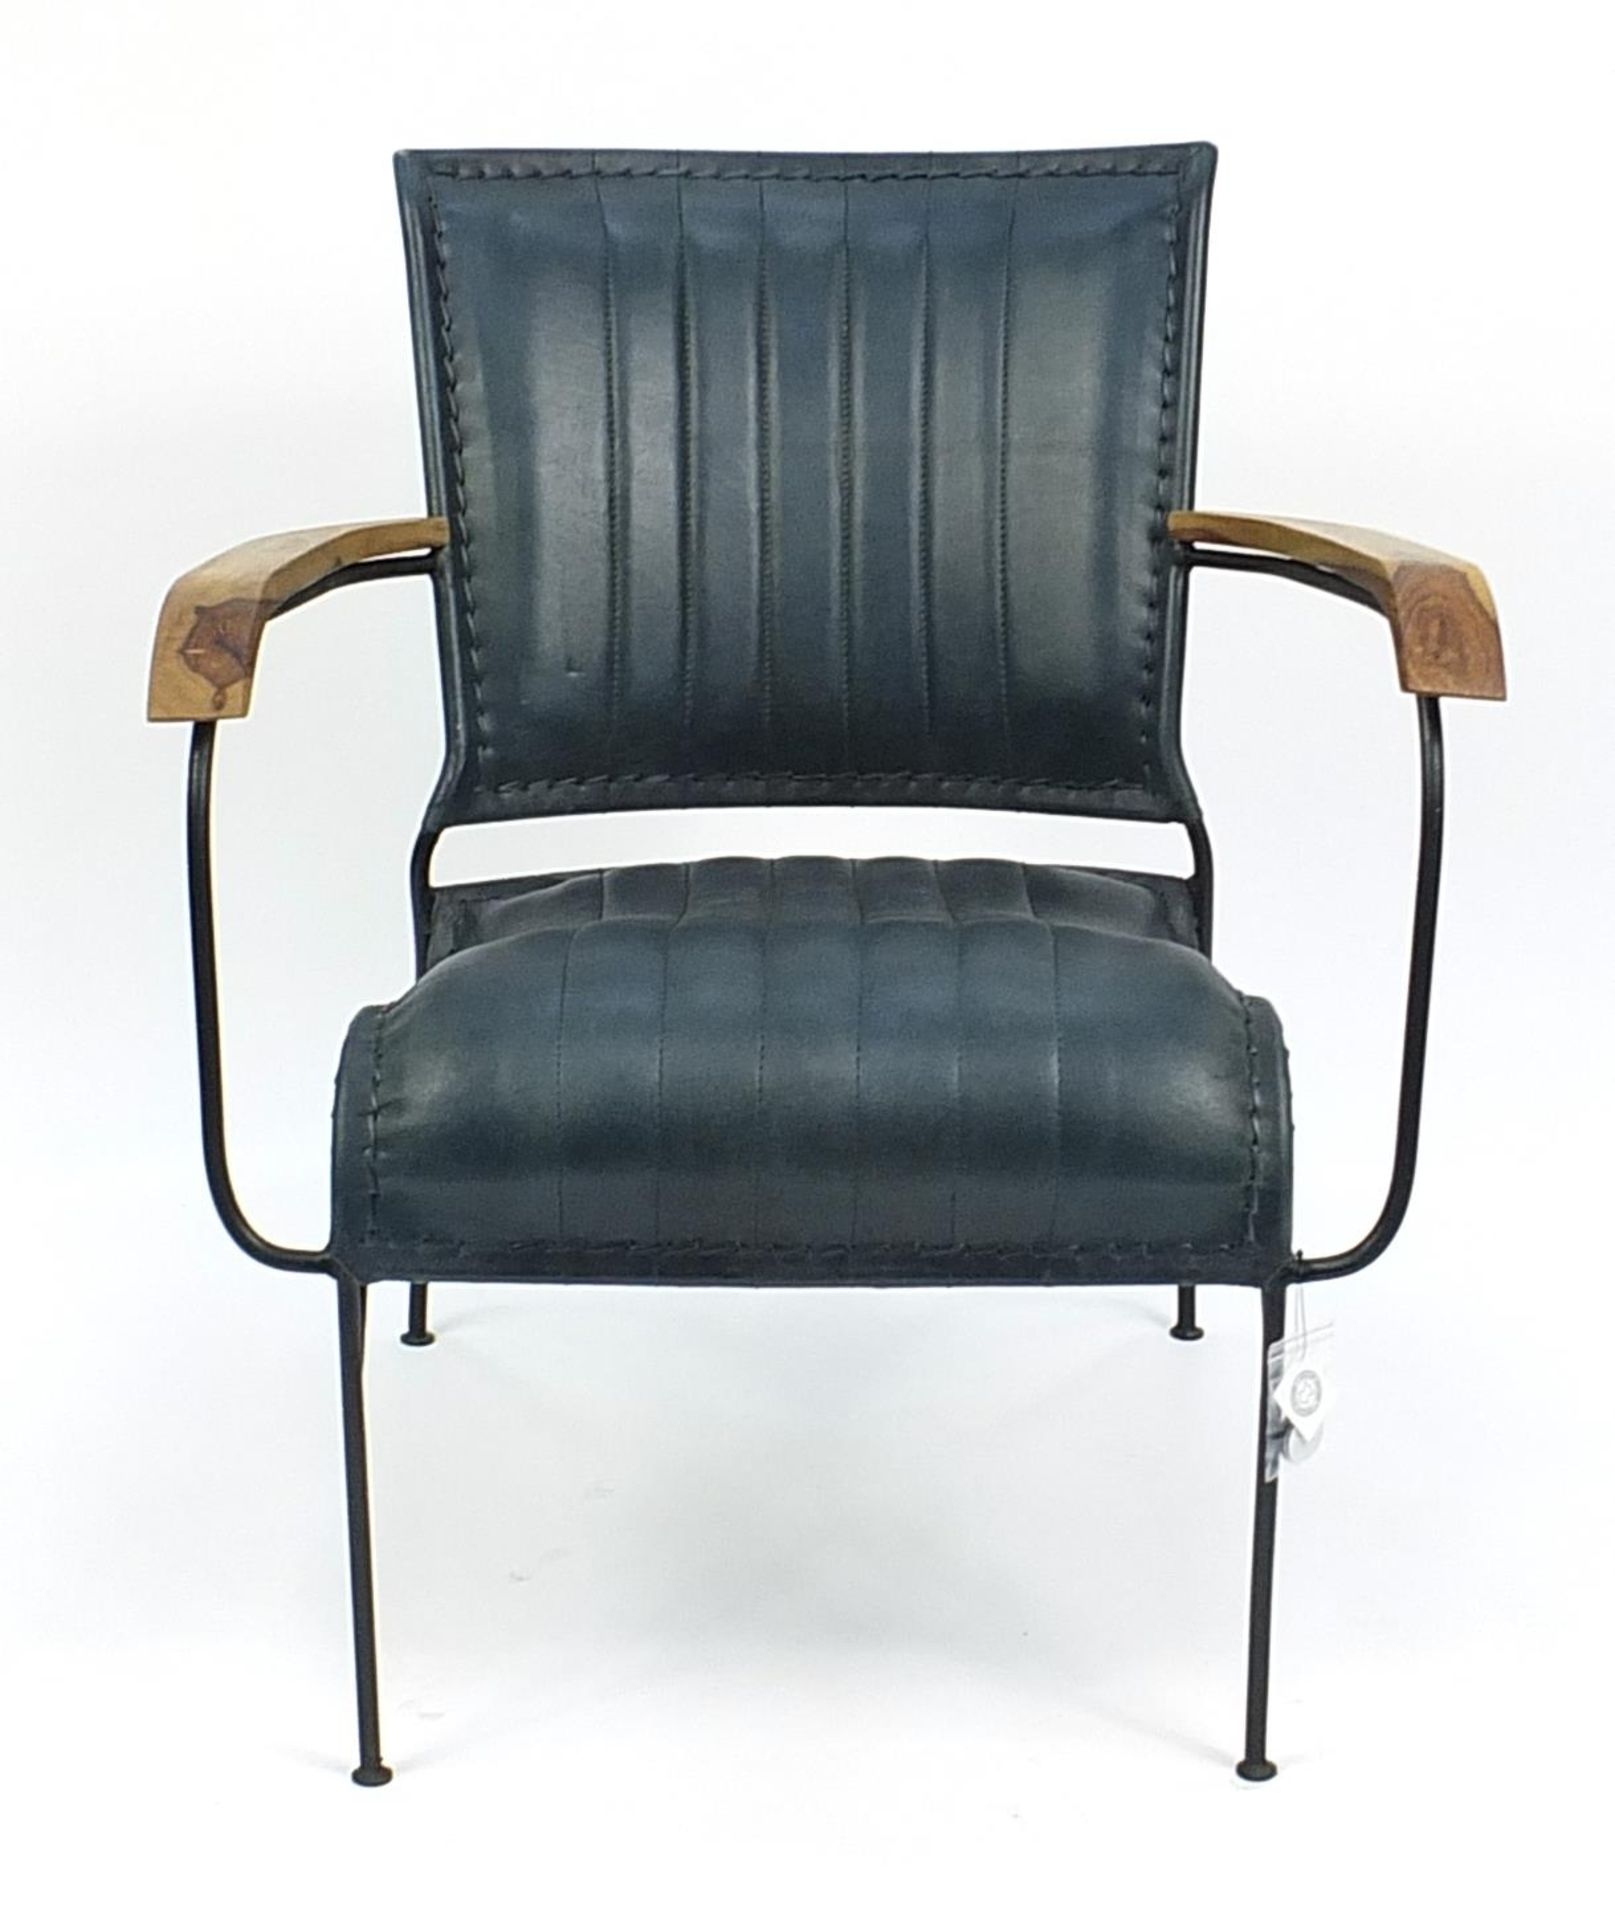 Industrial hardwood and leather design elbow chair, 75cm high - Image 2 of 3